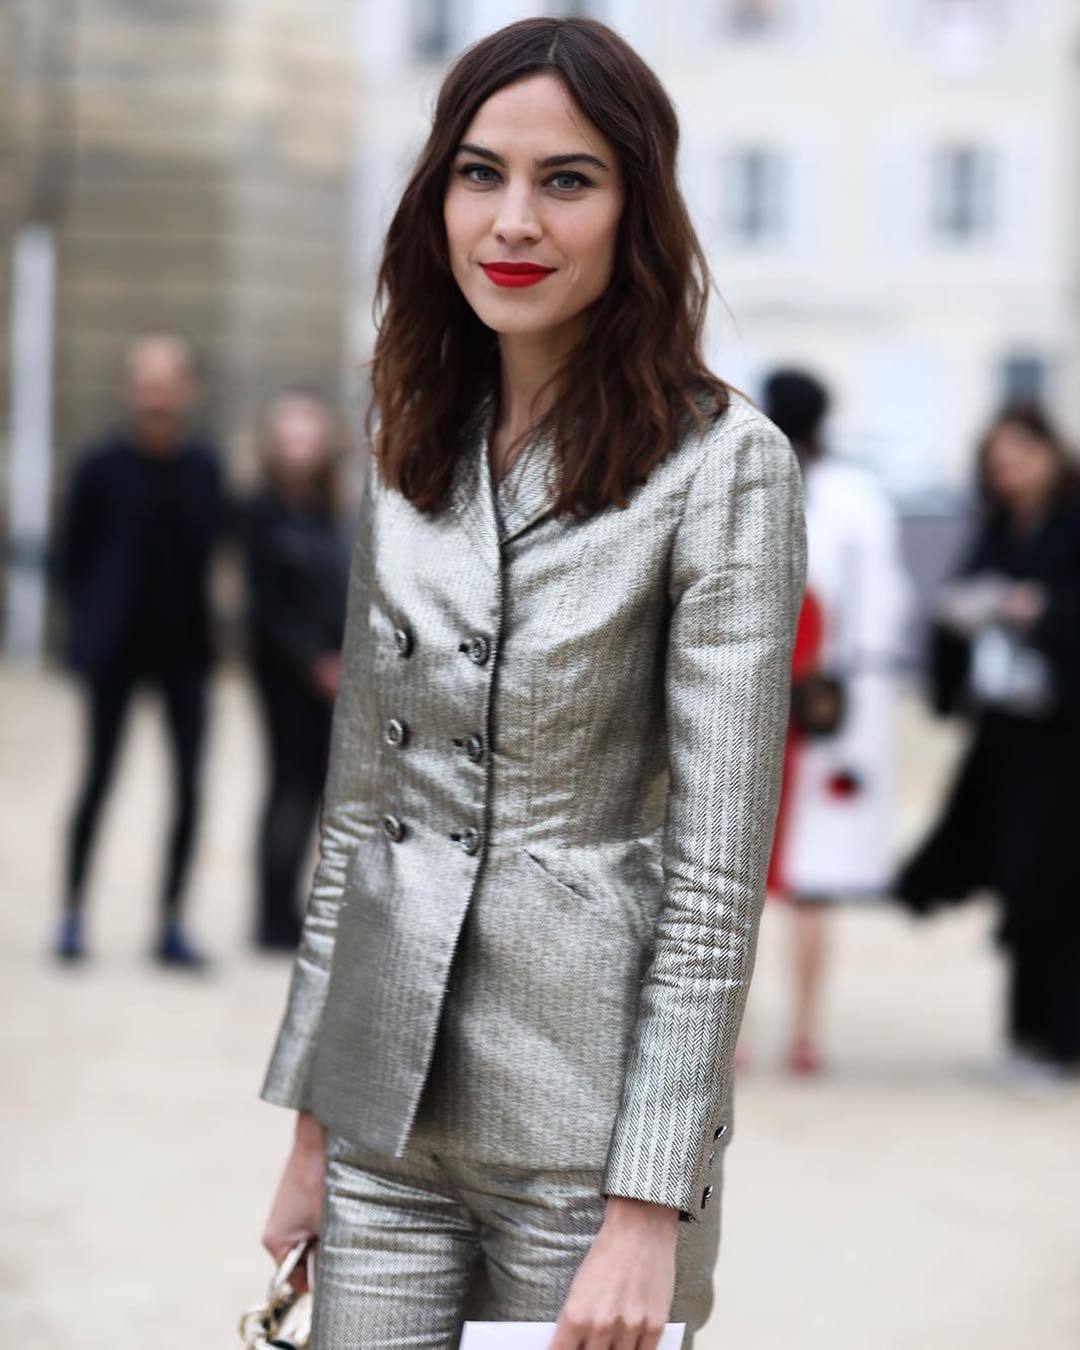 Alexa Inspiration — Chung attends Dior's 2019 show in...